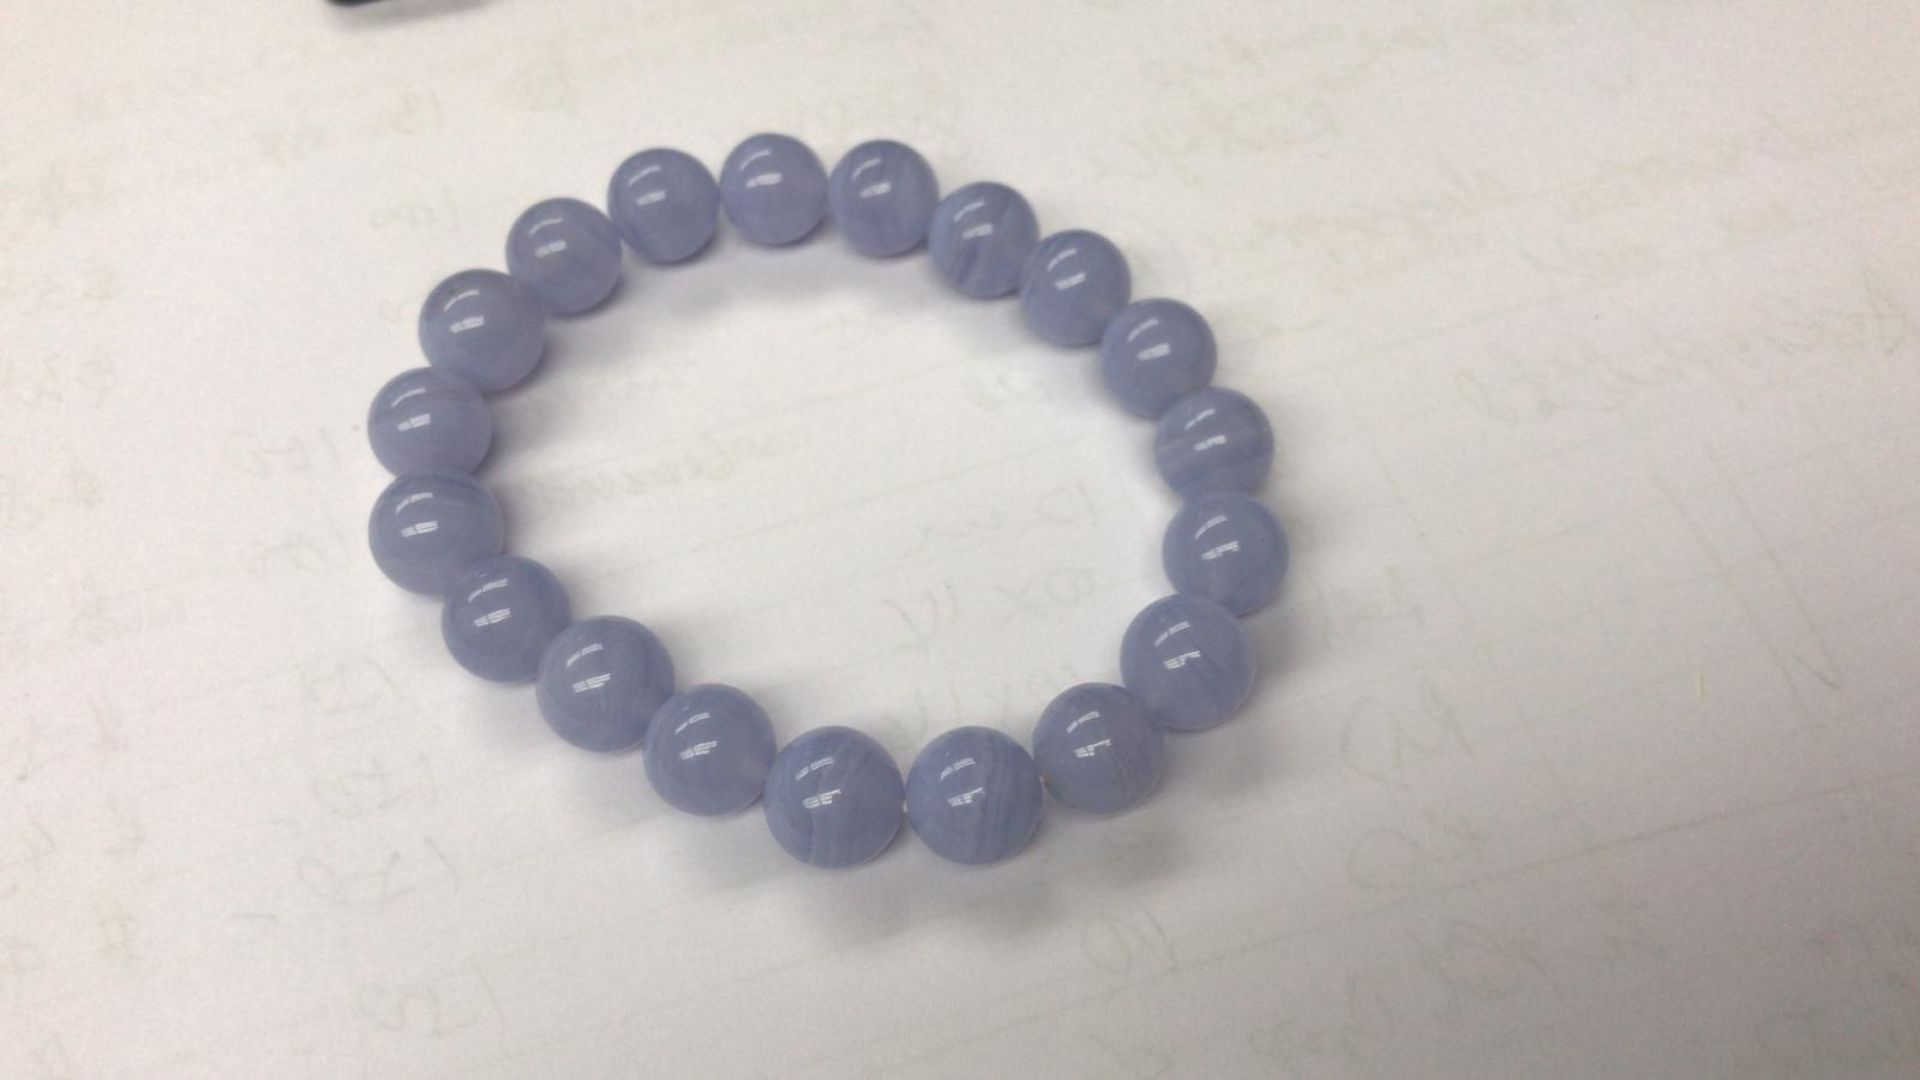 A Bracelet Placed On A White Paper